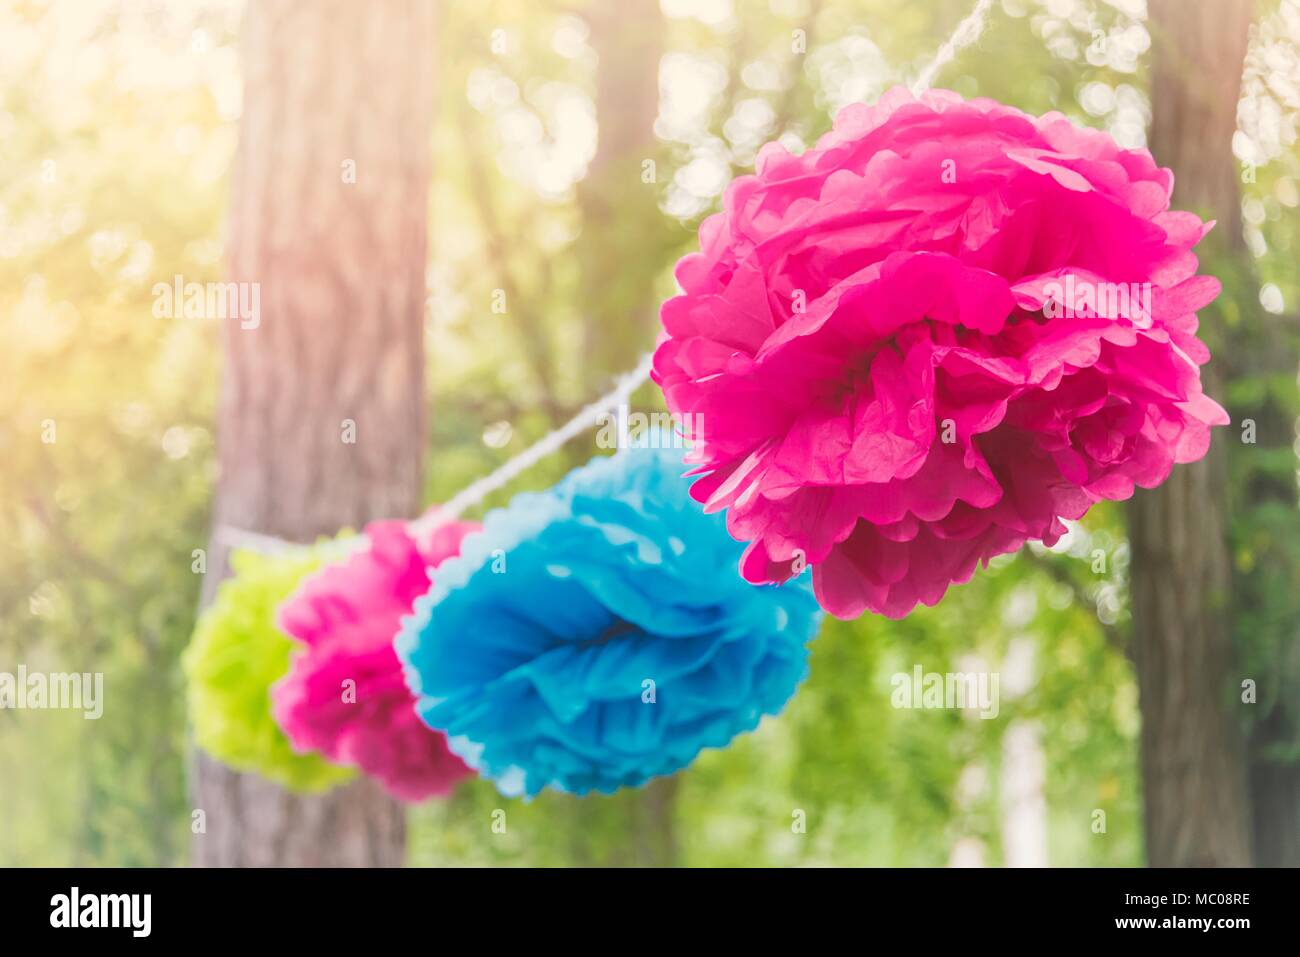 Close up of a colorful party garland made of paper flowers tied between trees in a park at an open air celebration event. Stock Photo